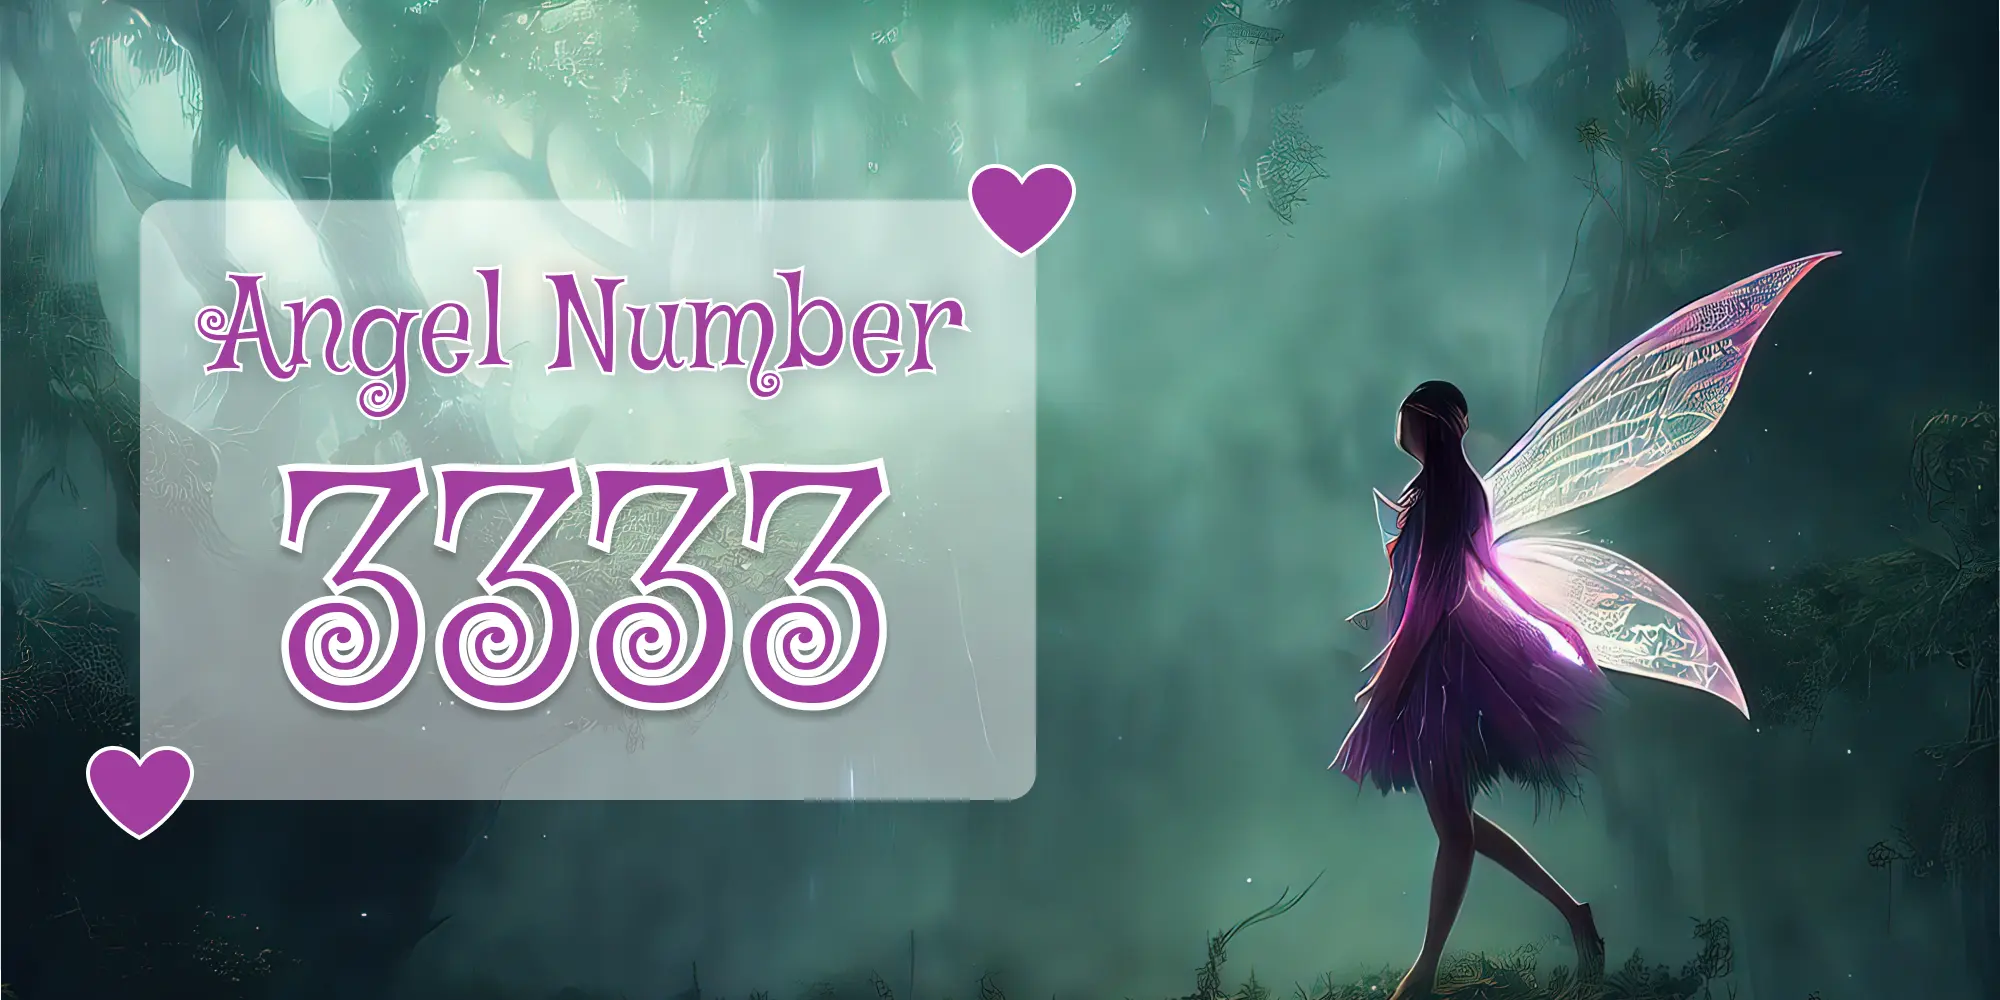 3333 Angel Number Meaning & Simple Numerology